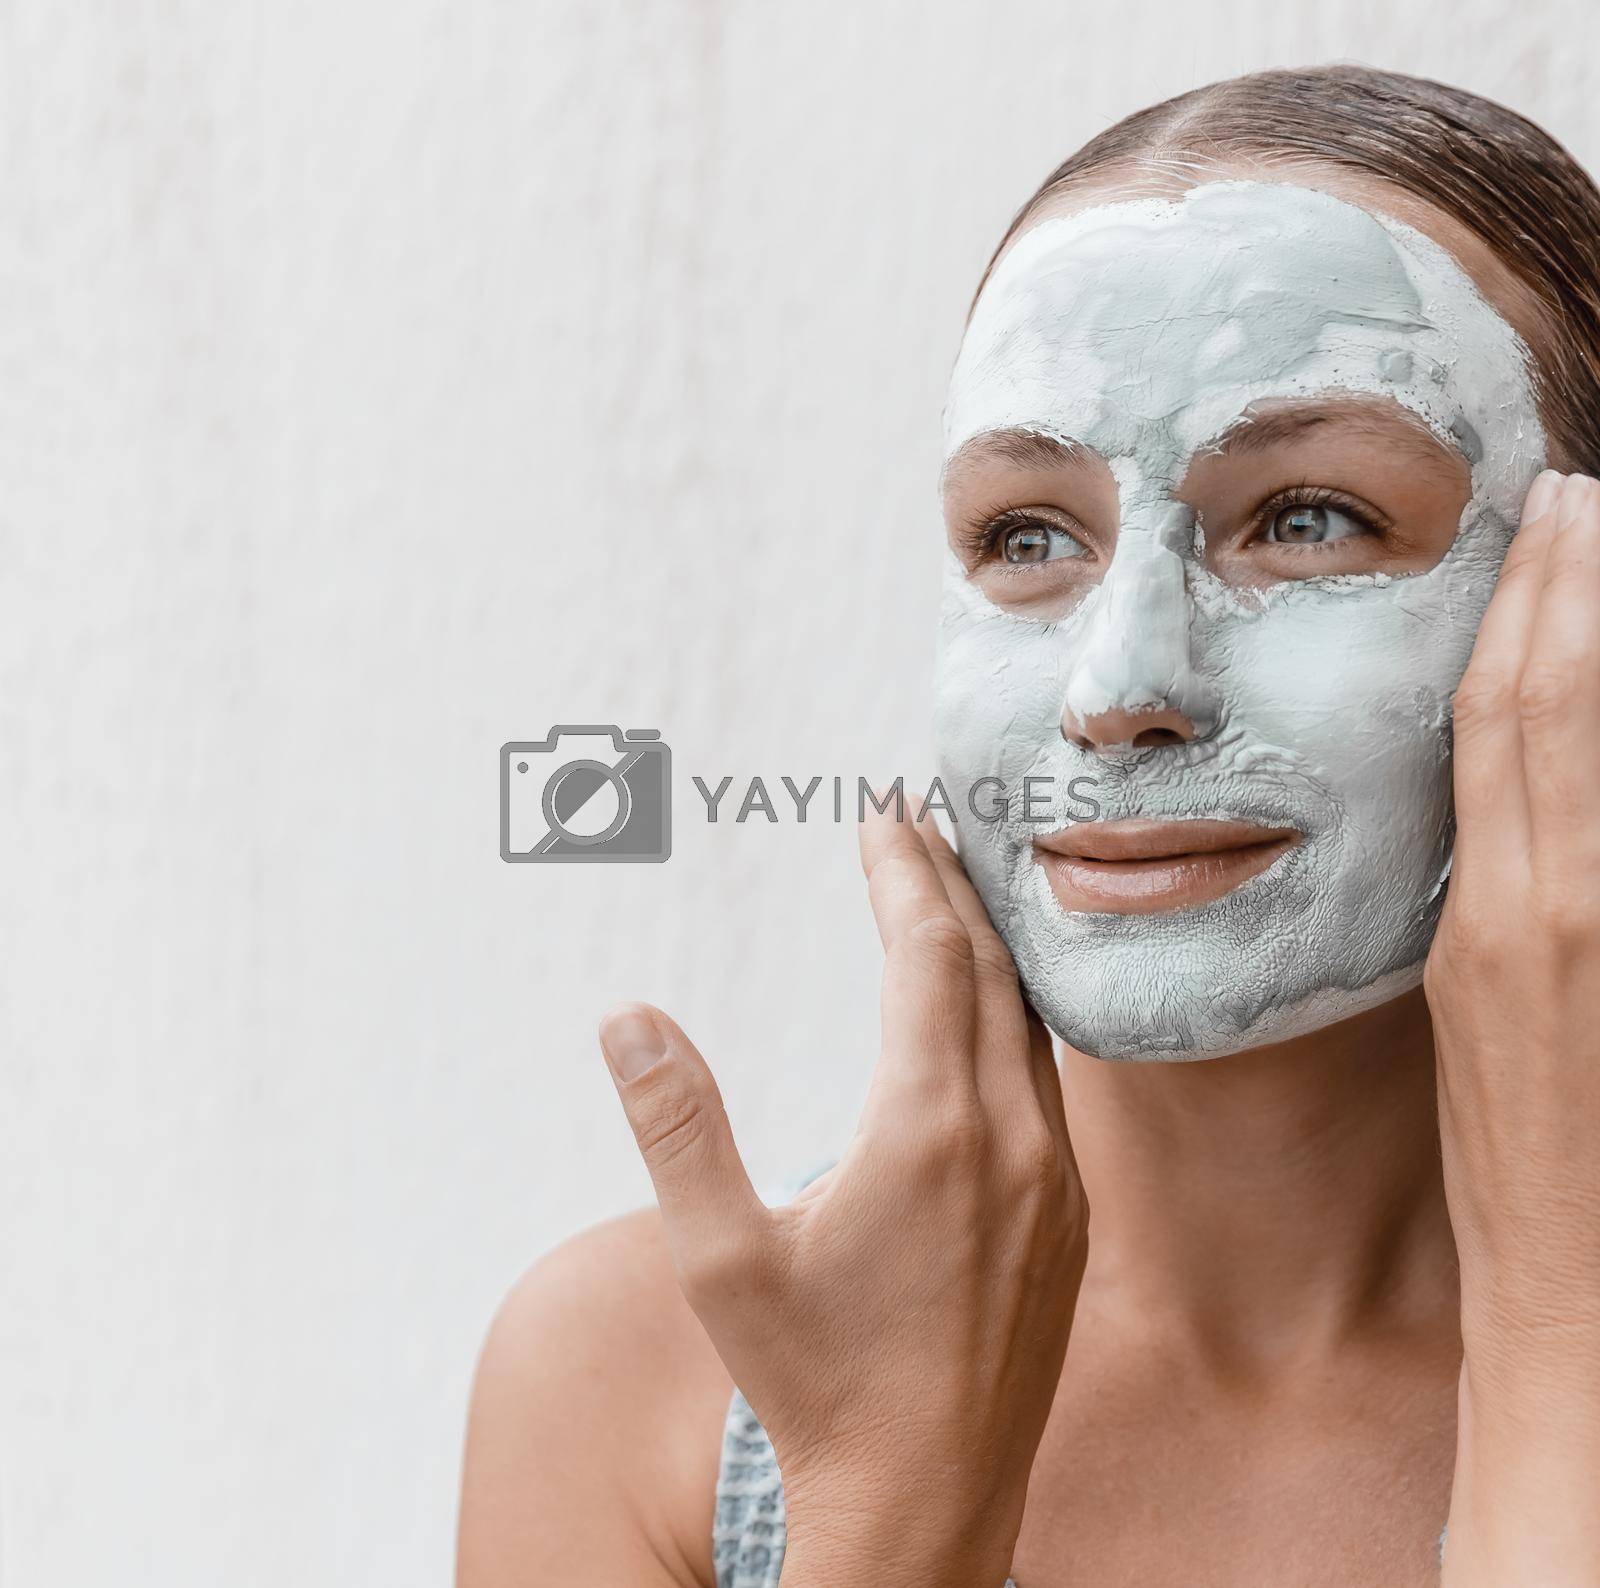 Royalty free image of Woman Applying Dead Sea Clay by Anna_Omelchenko